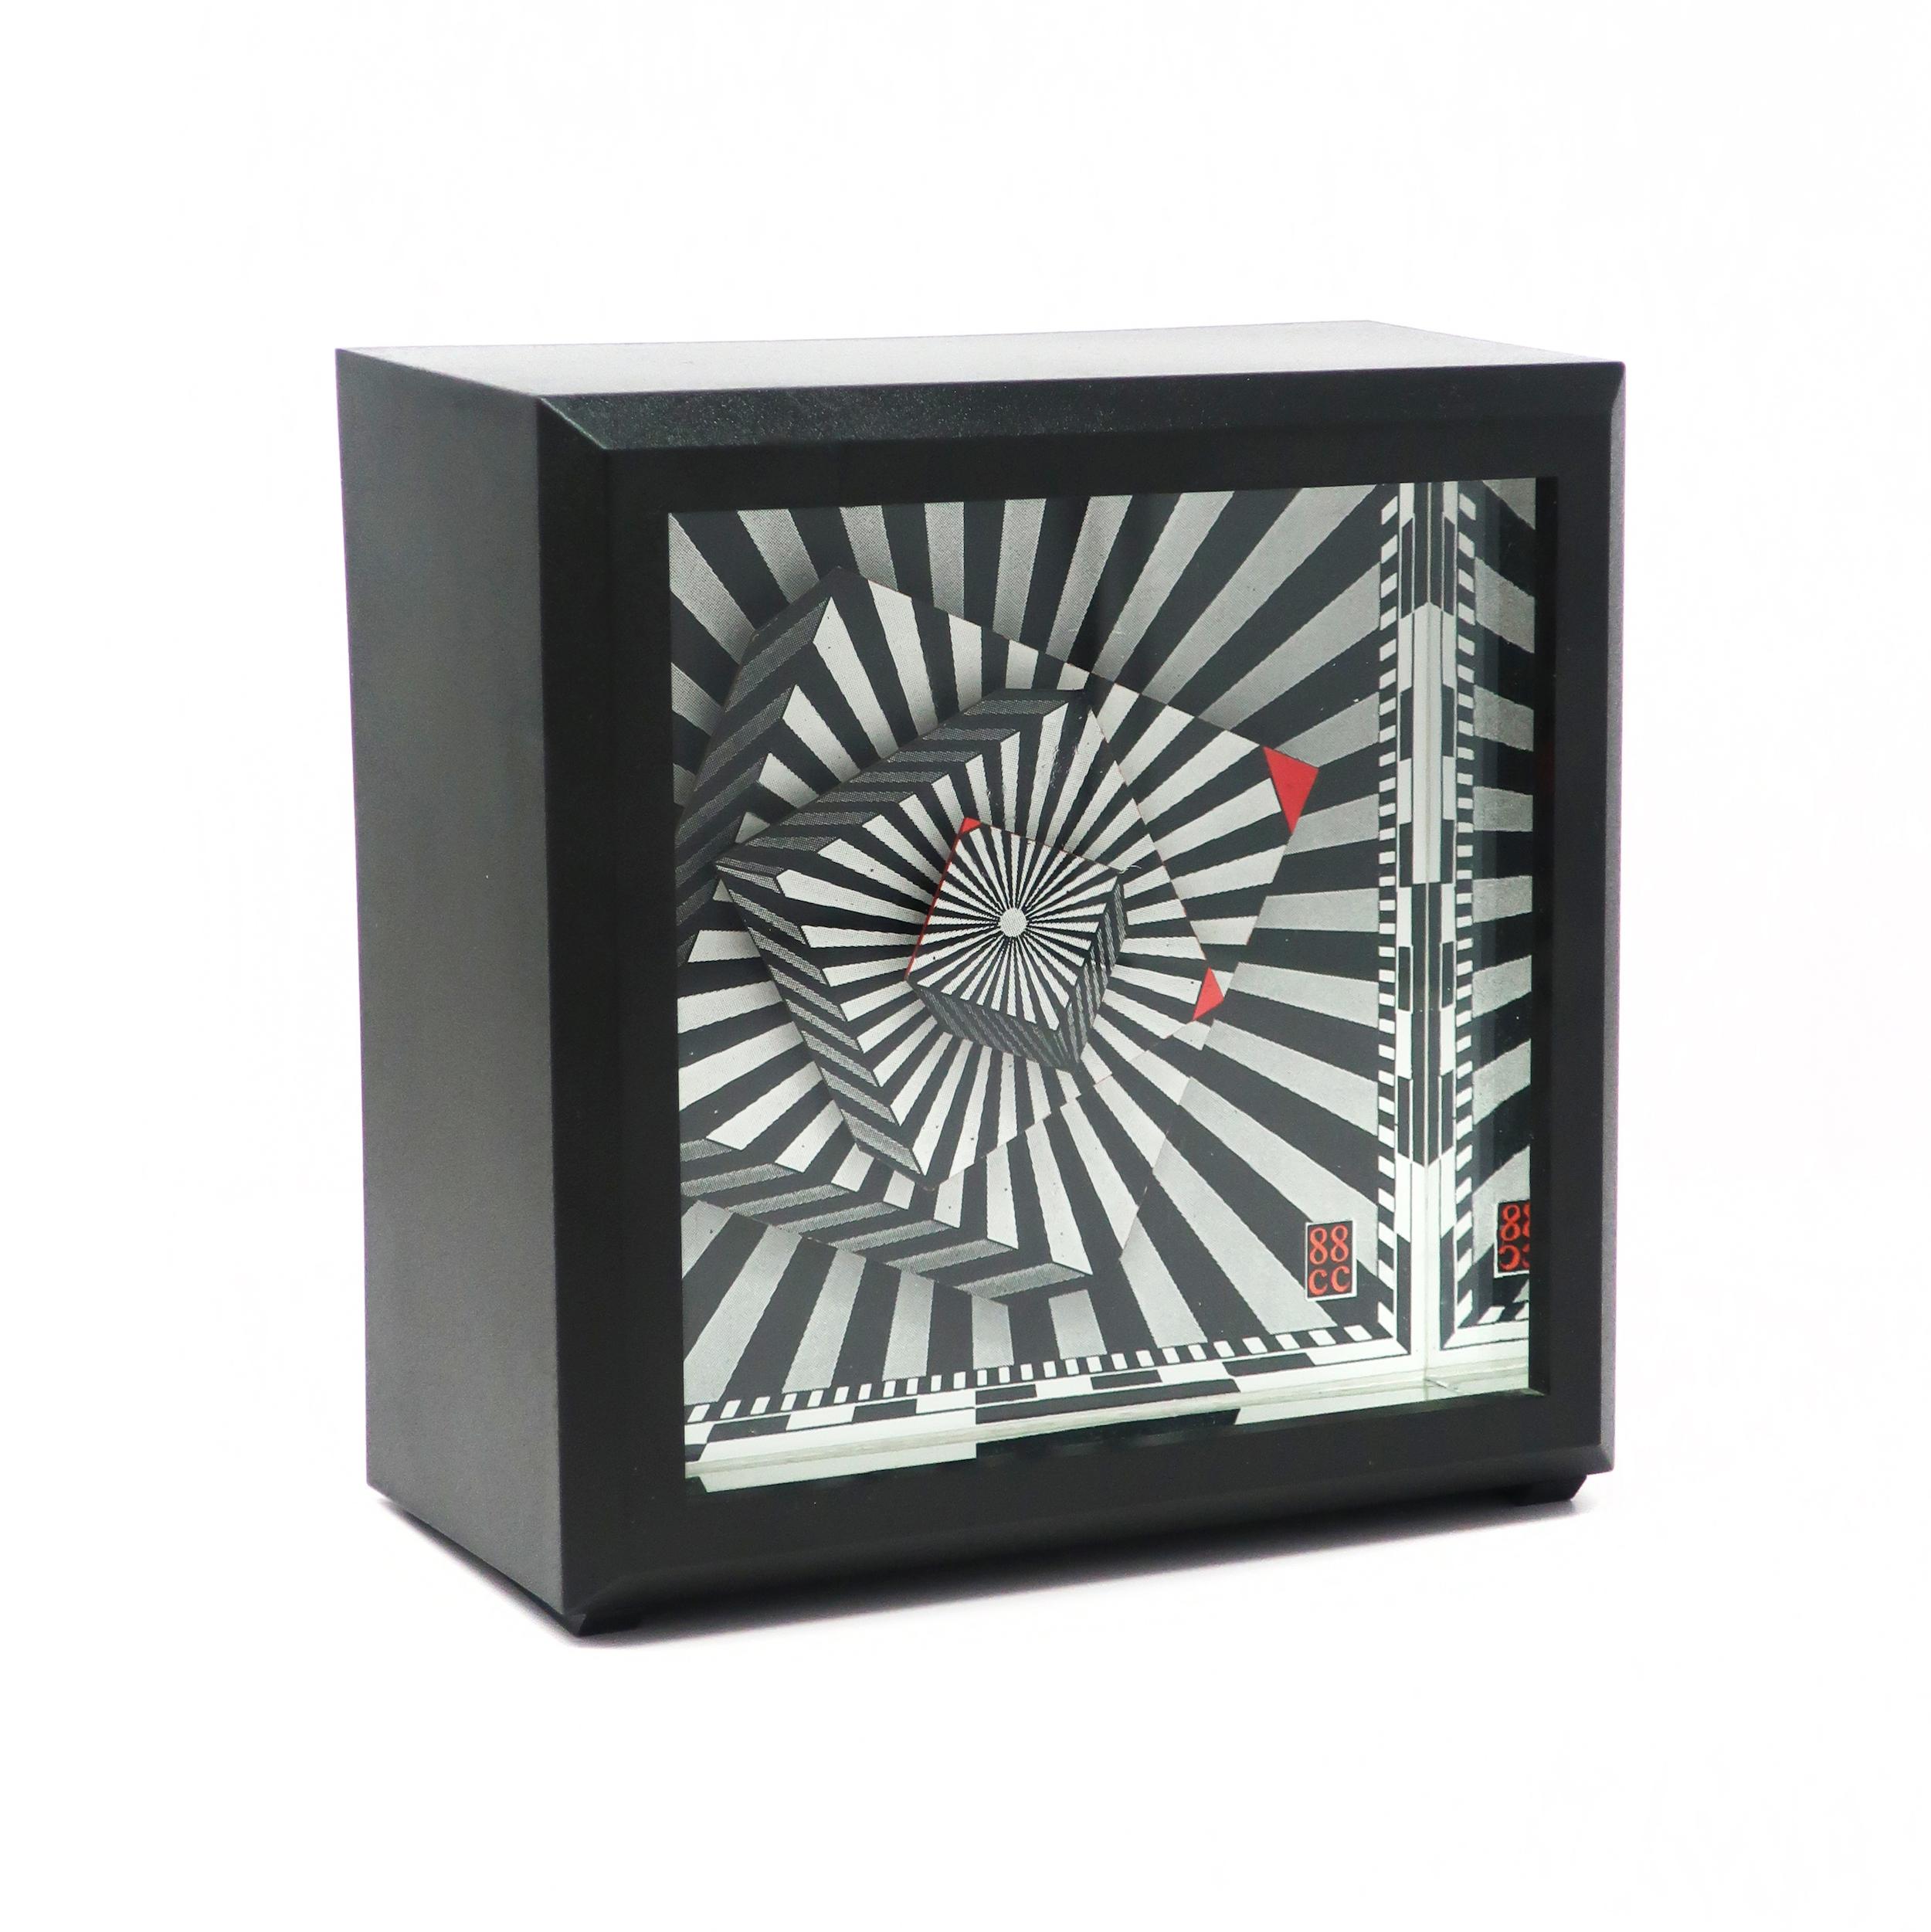 A rare 1988 desk clock designed by Douglas Chalk for clever clocks. A square plastic case, mesmerizing black and white psychedelic hands, and orange triangles at the tip of each hand. 

In very good vintage condition and in original